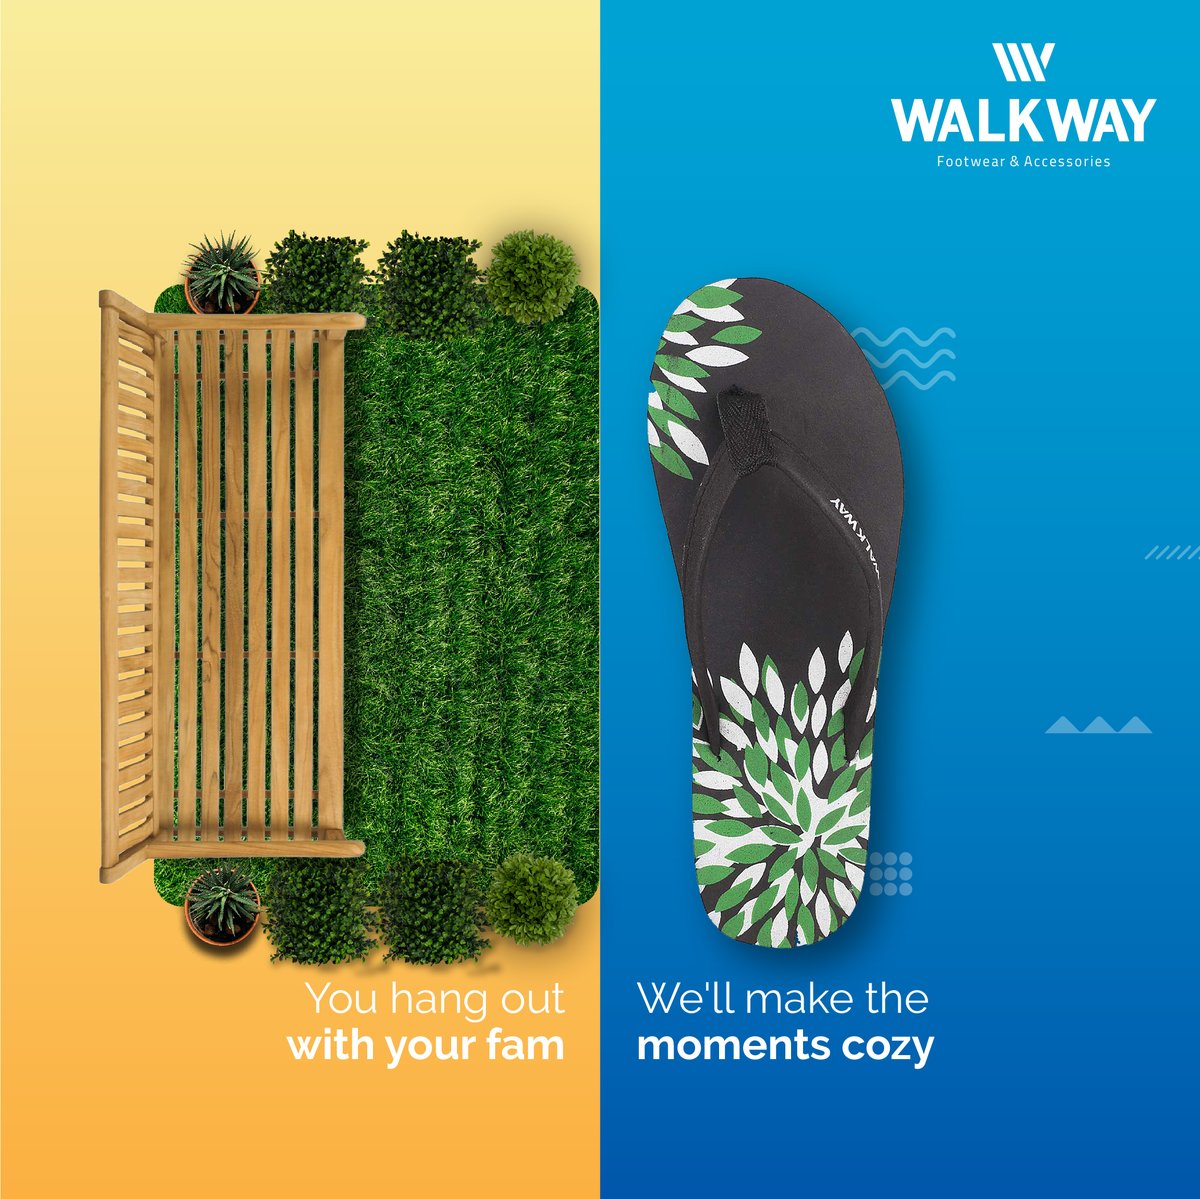 Switch off from the outside world and make moments breezy and comfy with your loved ones in our trendiest comfortable footwear collection. 

#walkway #trendeveryday #casualwear #casualook #slipper #ladieschappal #womensfootwear #trending #budgetshopping #Slippers